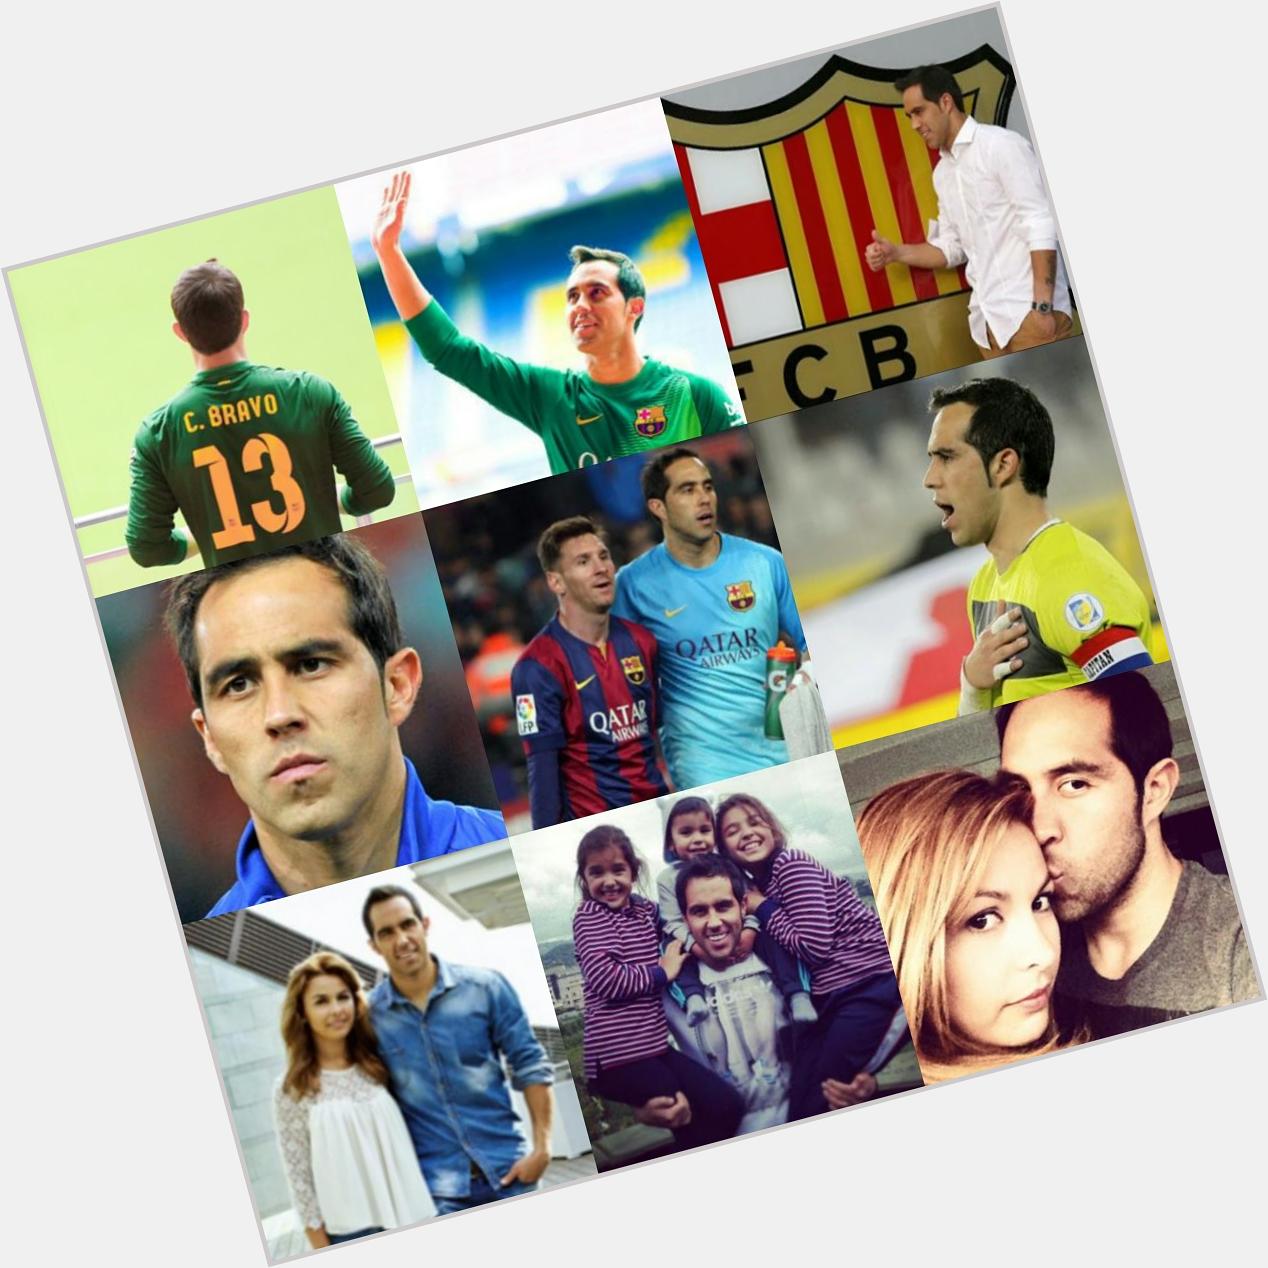 HAPPY BIRTHDAY TO OUR WALL, CLAUDIO BRAVO!   